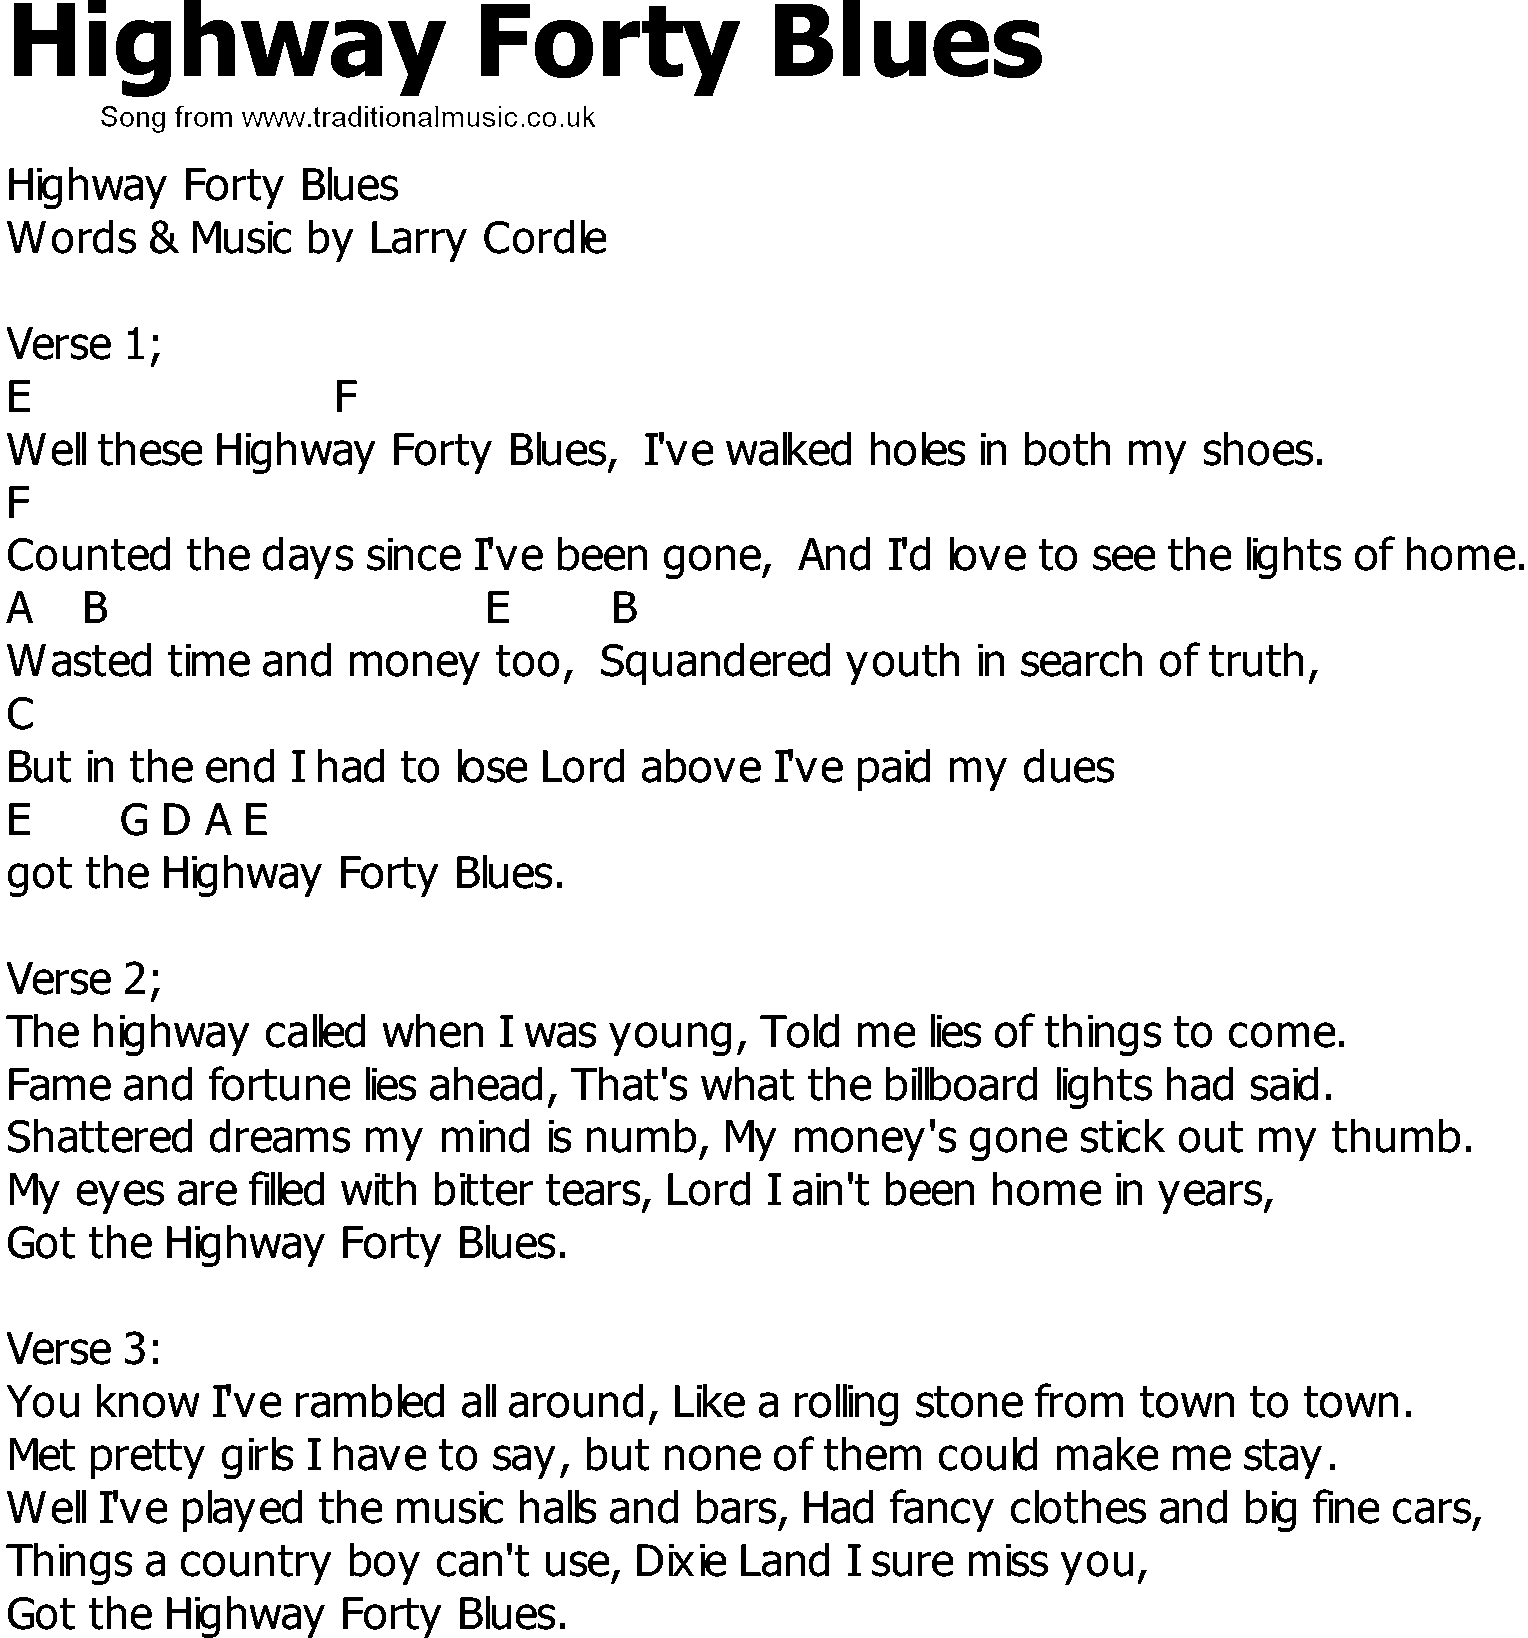 Old Country song lyrics with chords - Highway Forty Blues